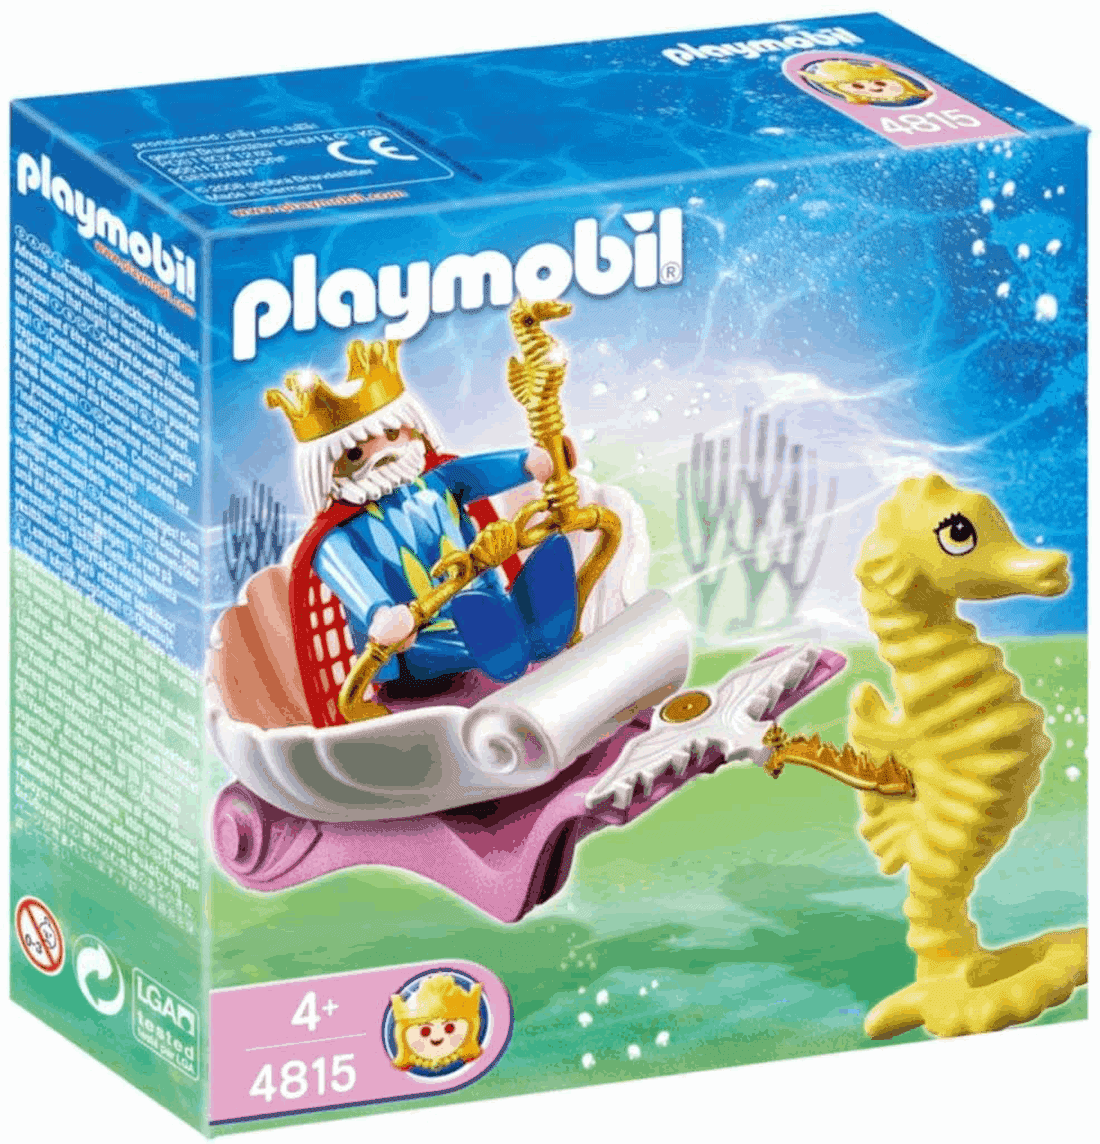 Playmobil - King Neptune With Seahorse Carriage - Ποσειδώνας Με Ιππόκαμπο